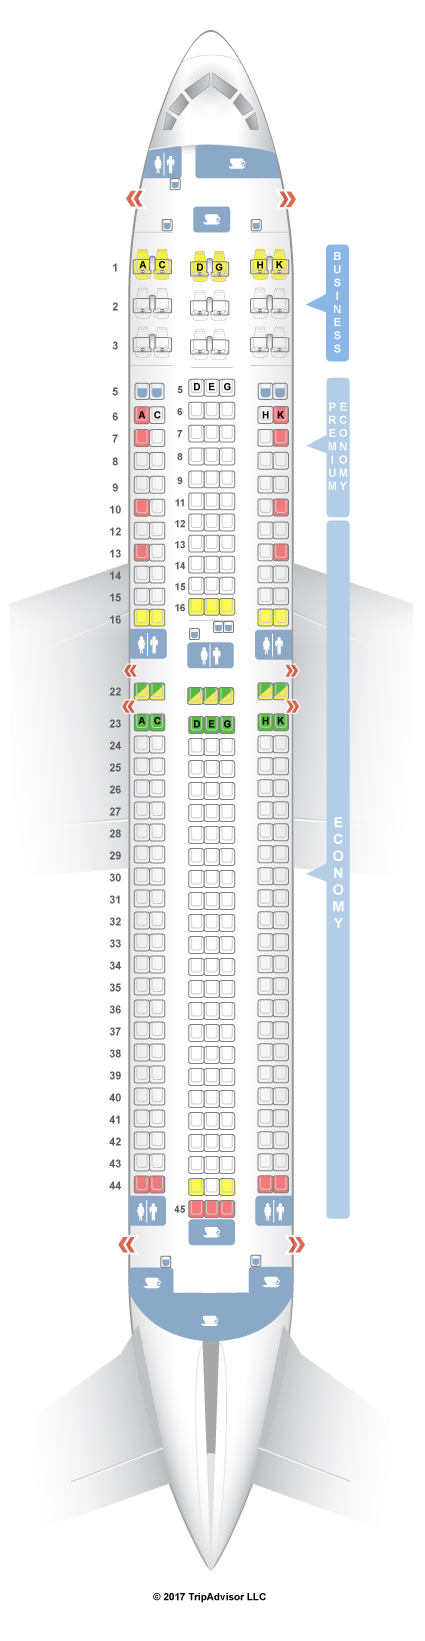 Condor Airlines Boeing 767 300 Seating Chart